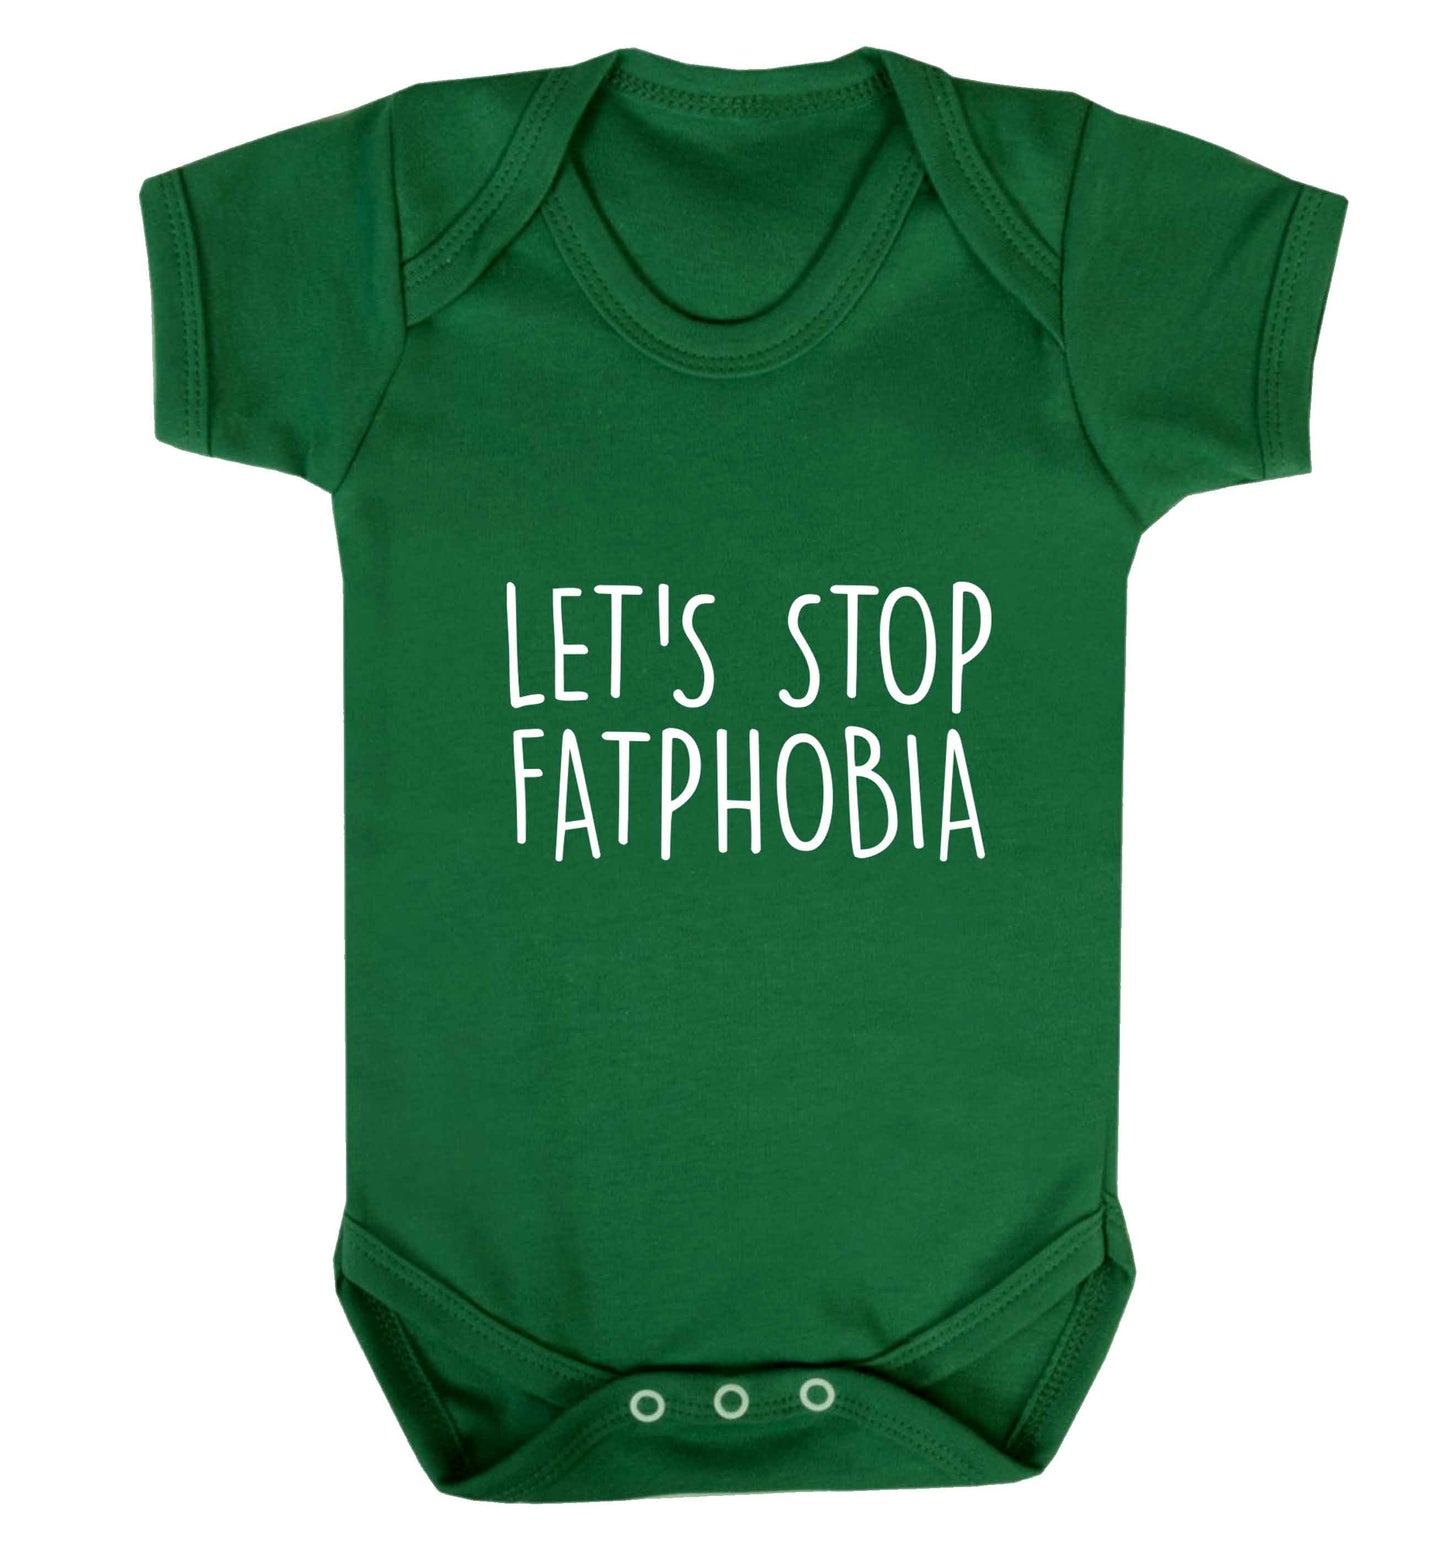 Let's stop fatphobia baby vest green 18-24 months